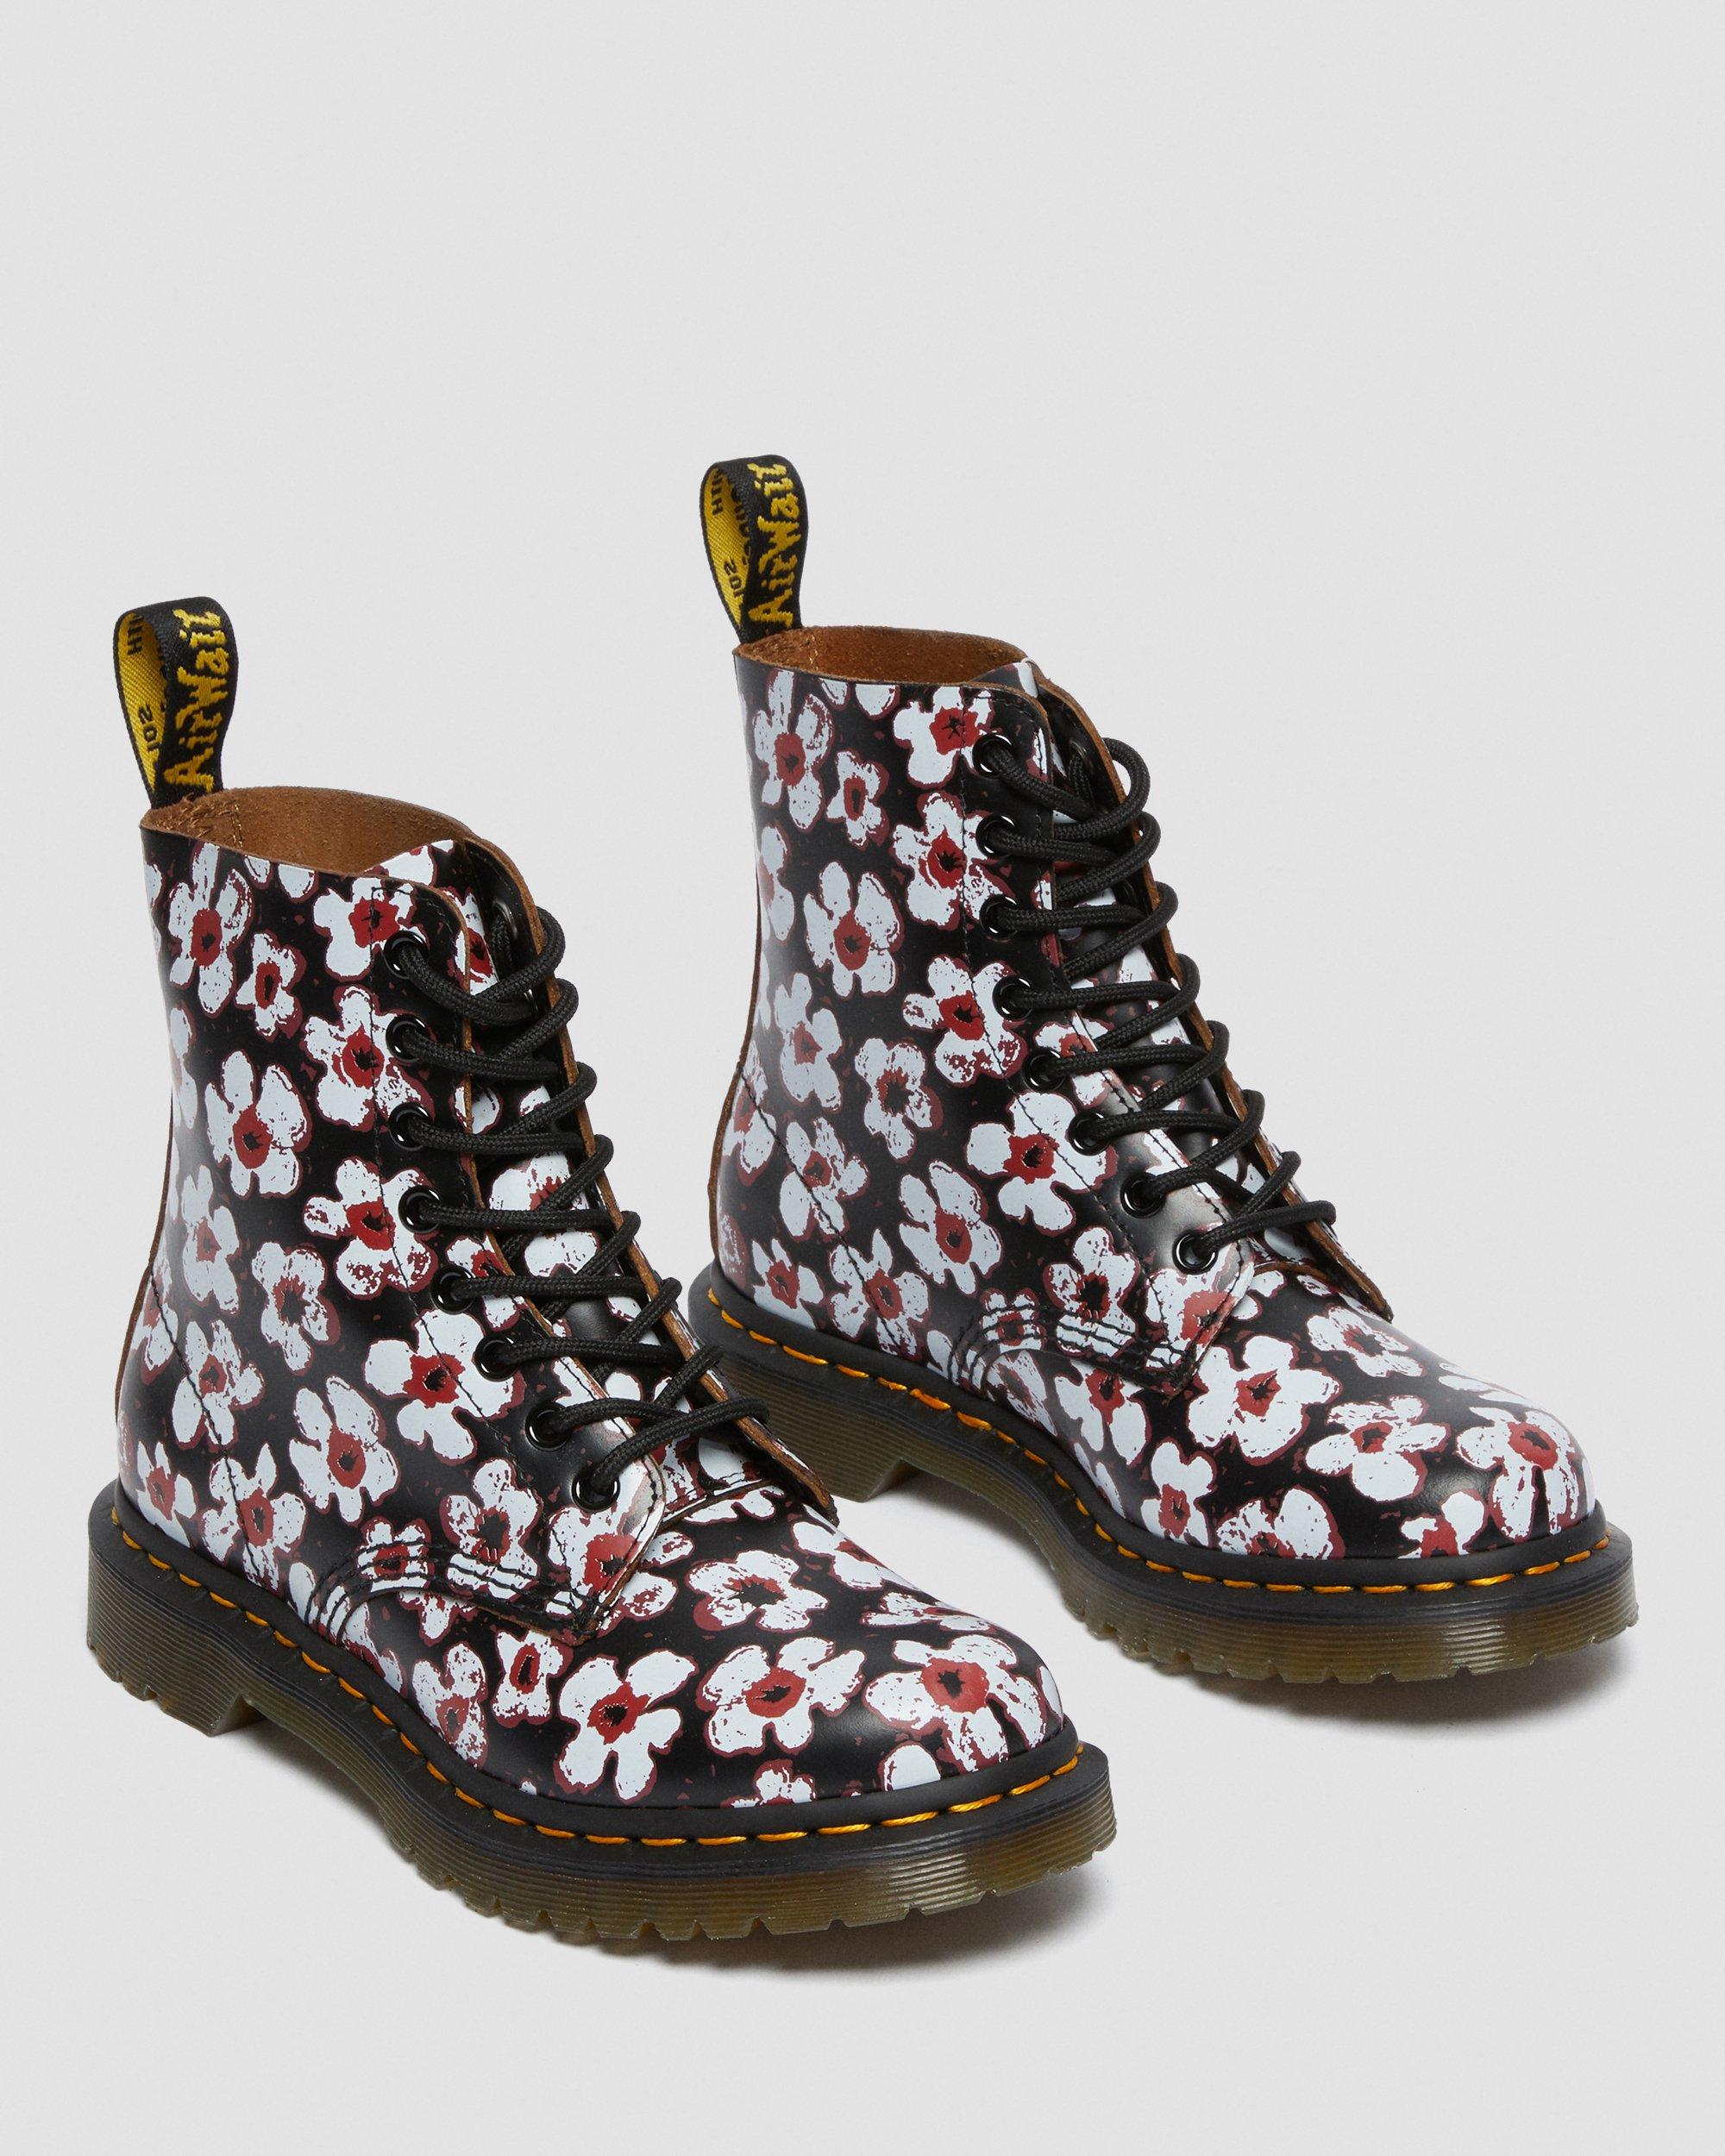 1460 Pascal Leather Lace Up Boots | Dr. Martens